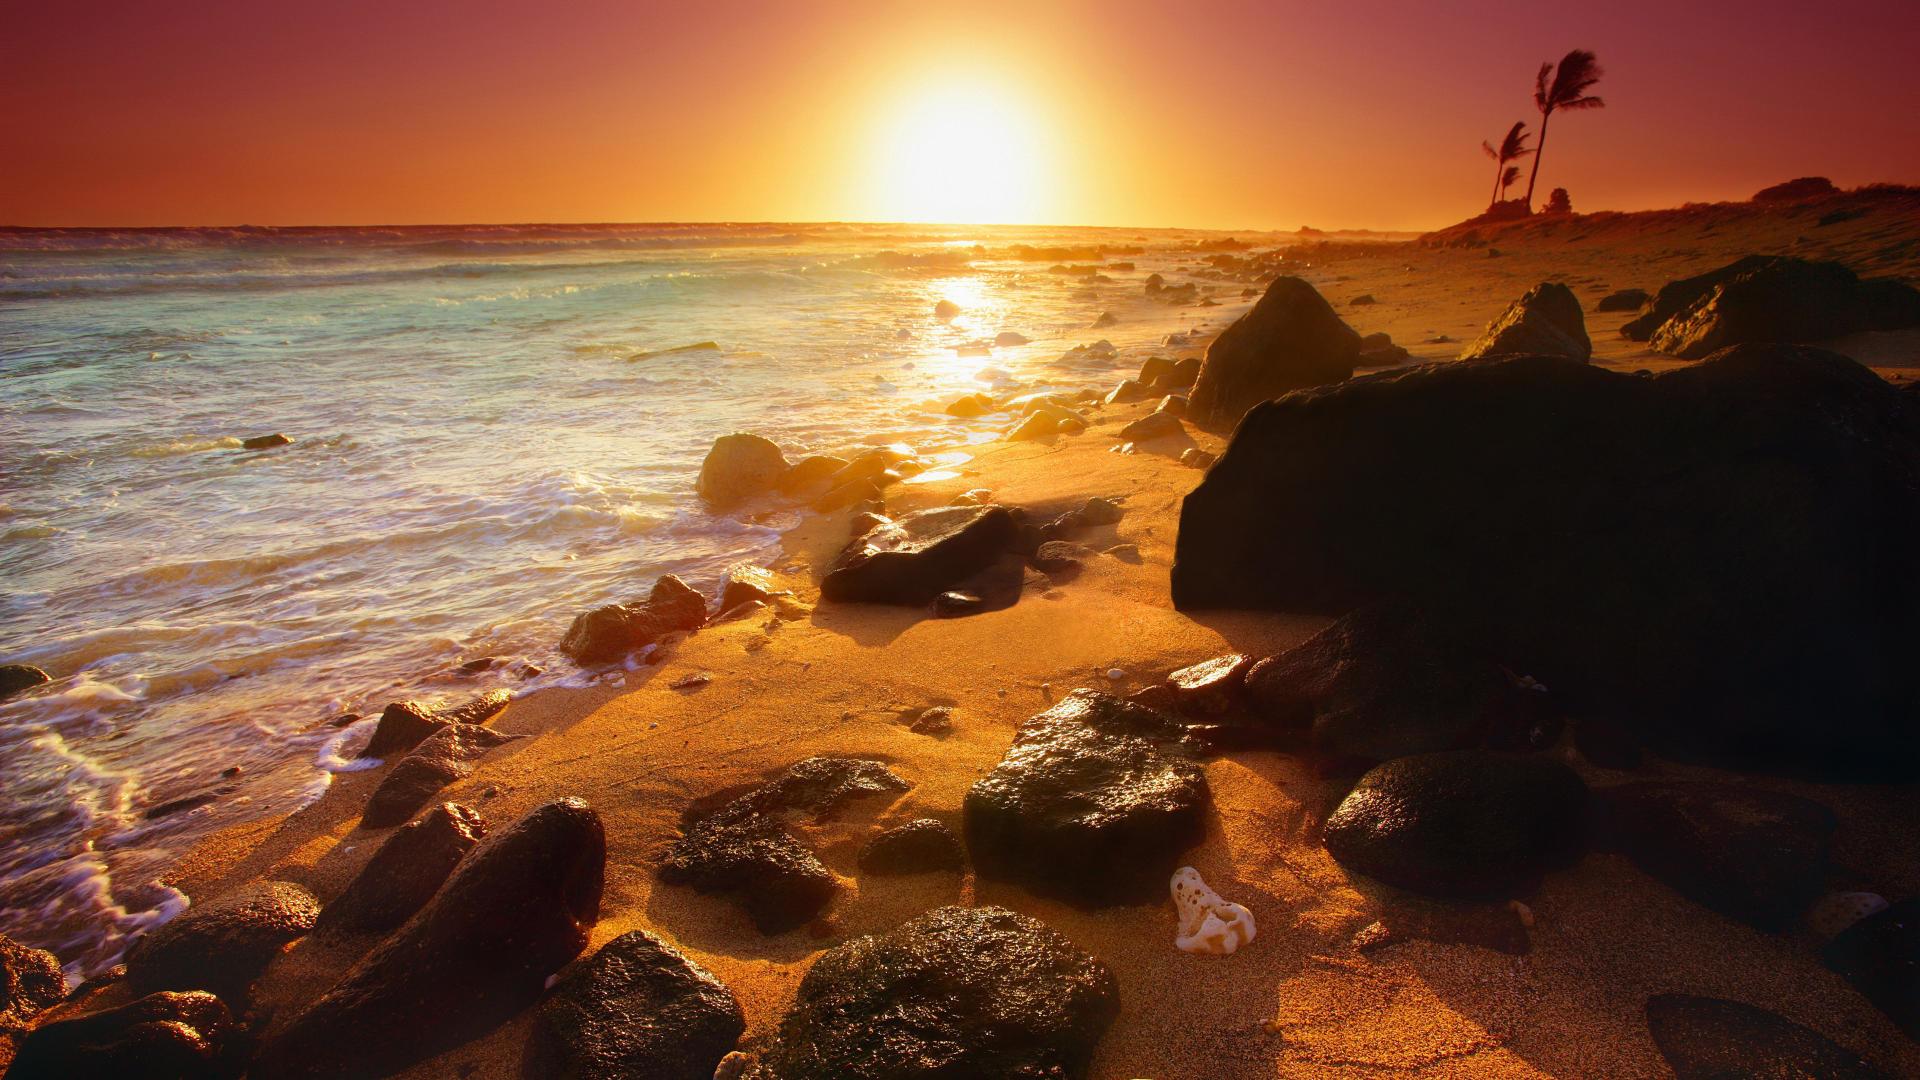 Hawaii Sunset Wallpaper background picture